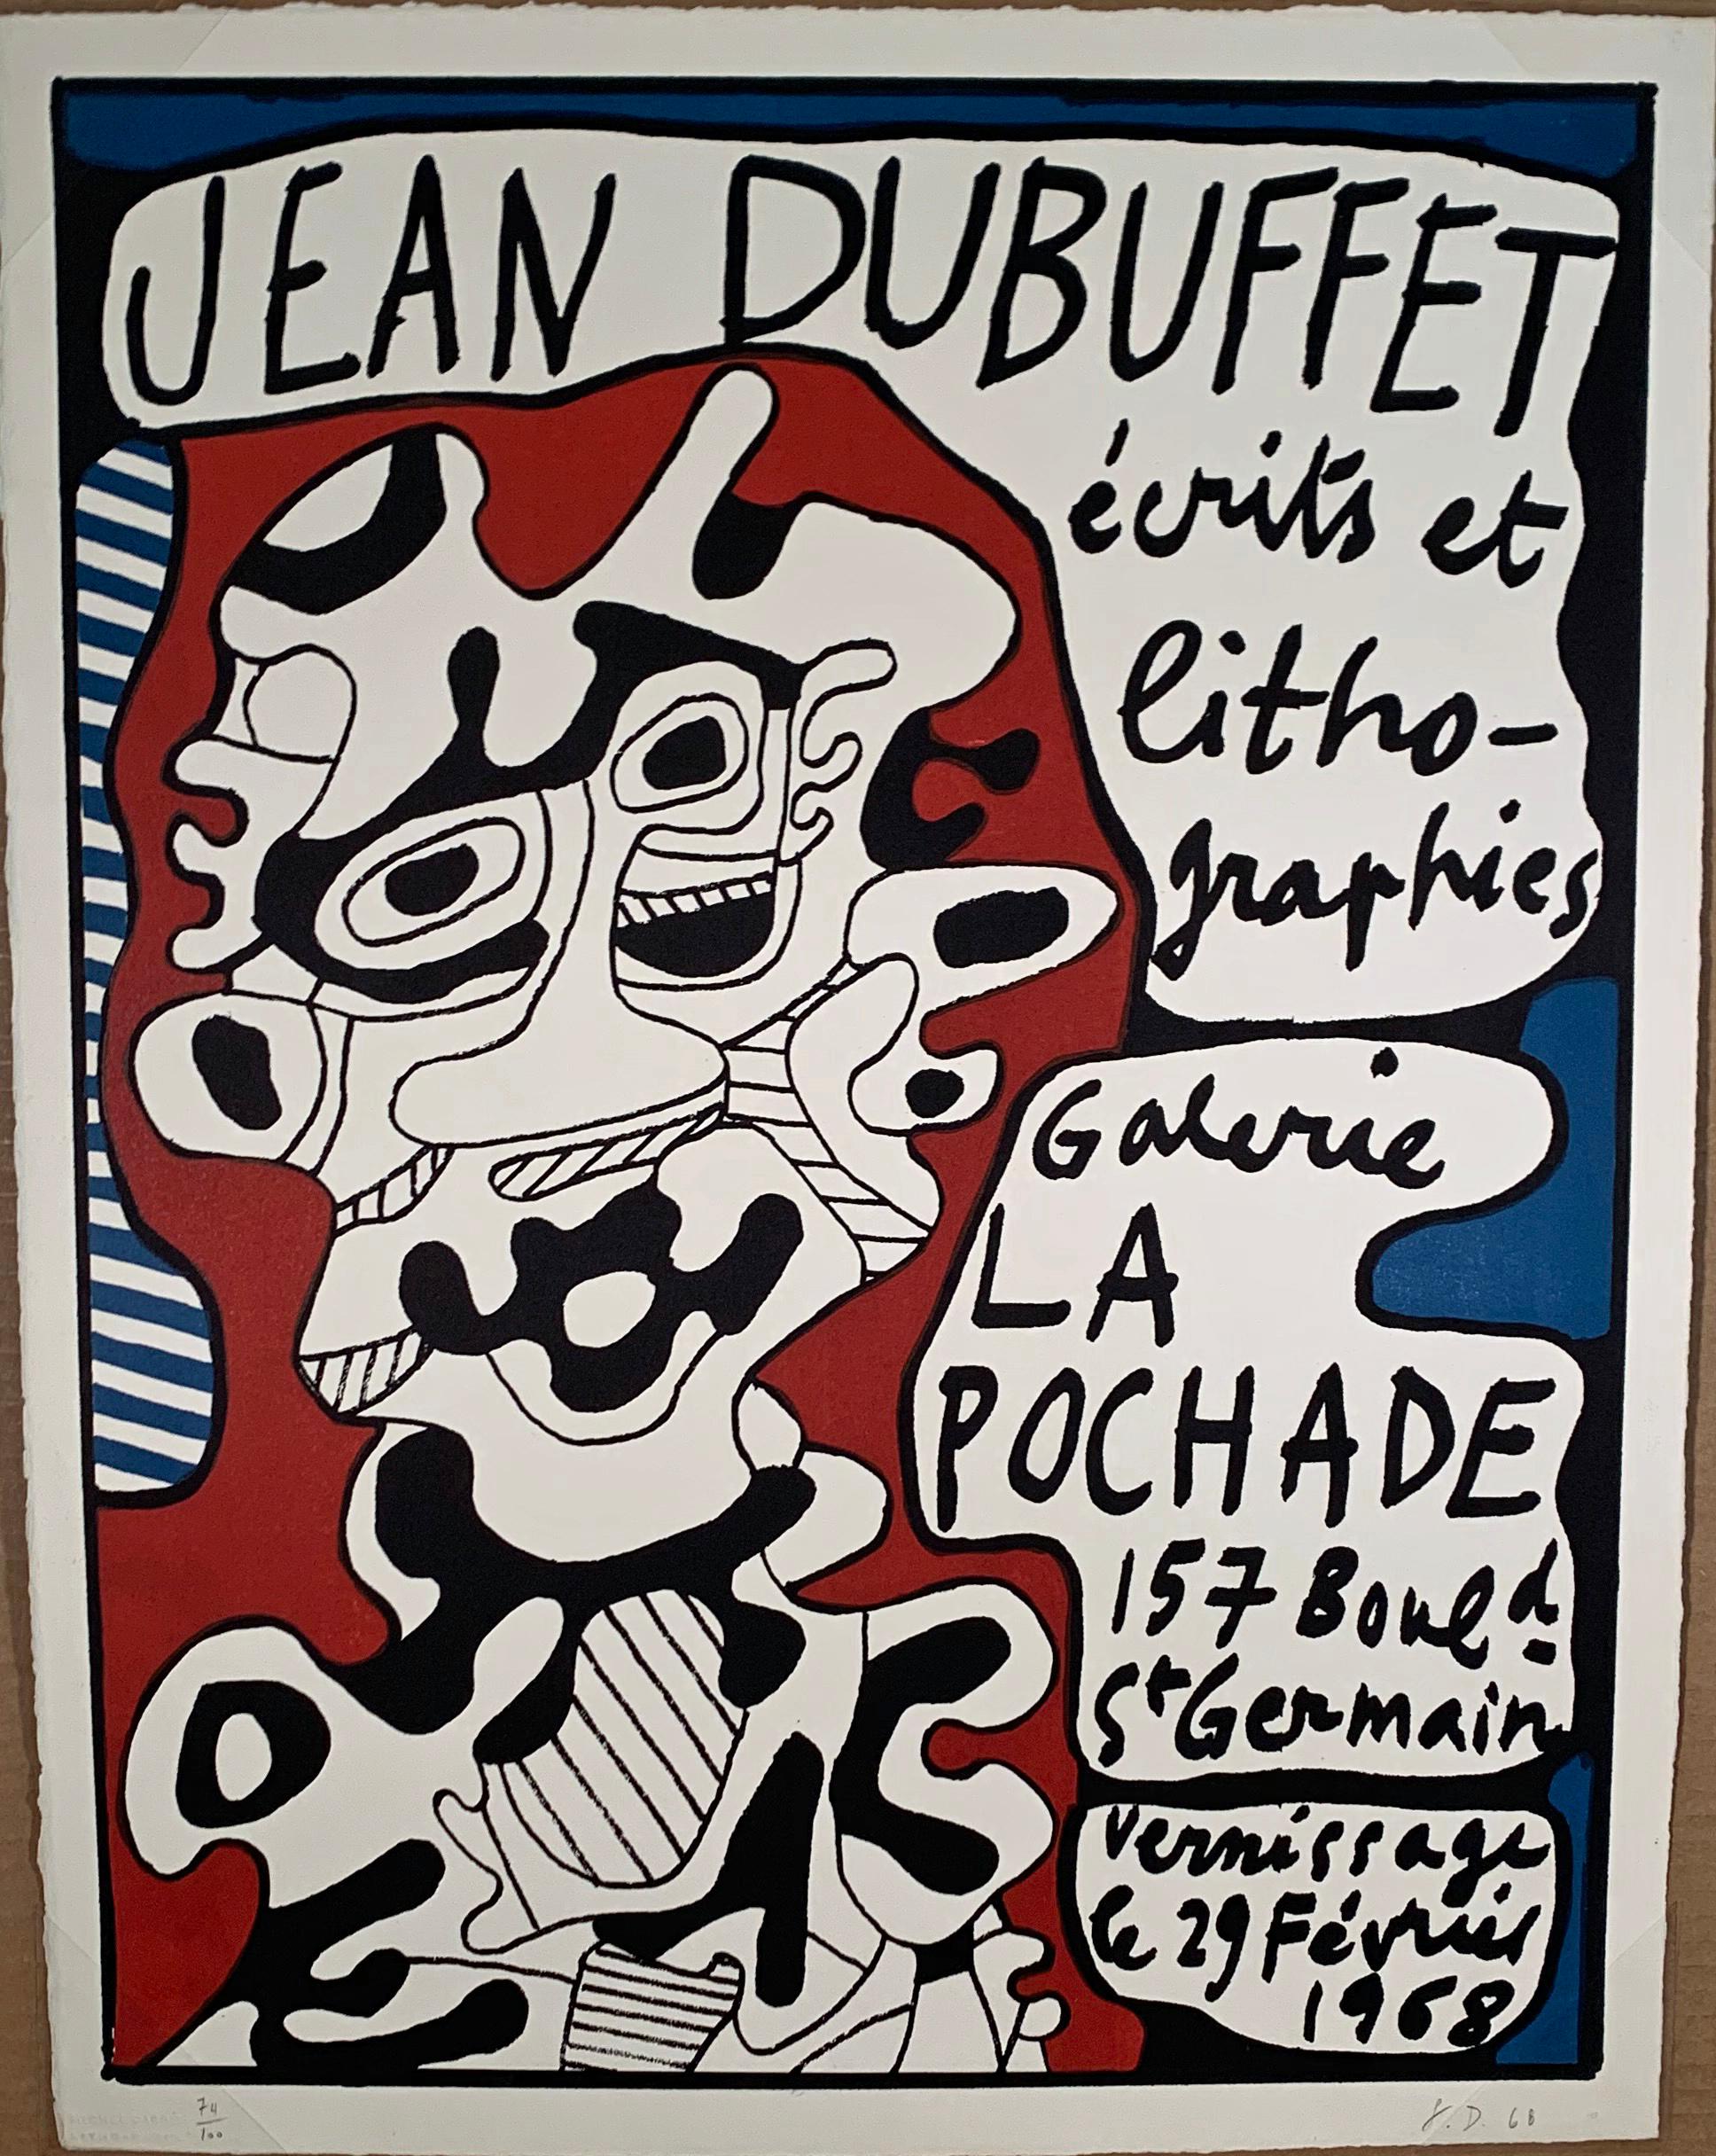 Jean Dubuffet Abstract Print - ECRITS ET LITHOGRAPHIES - GALERIE LA POCHADE